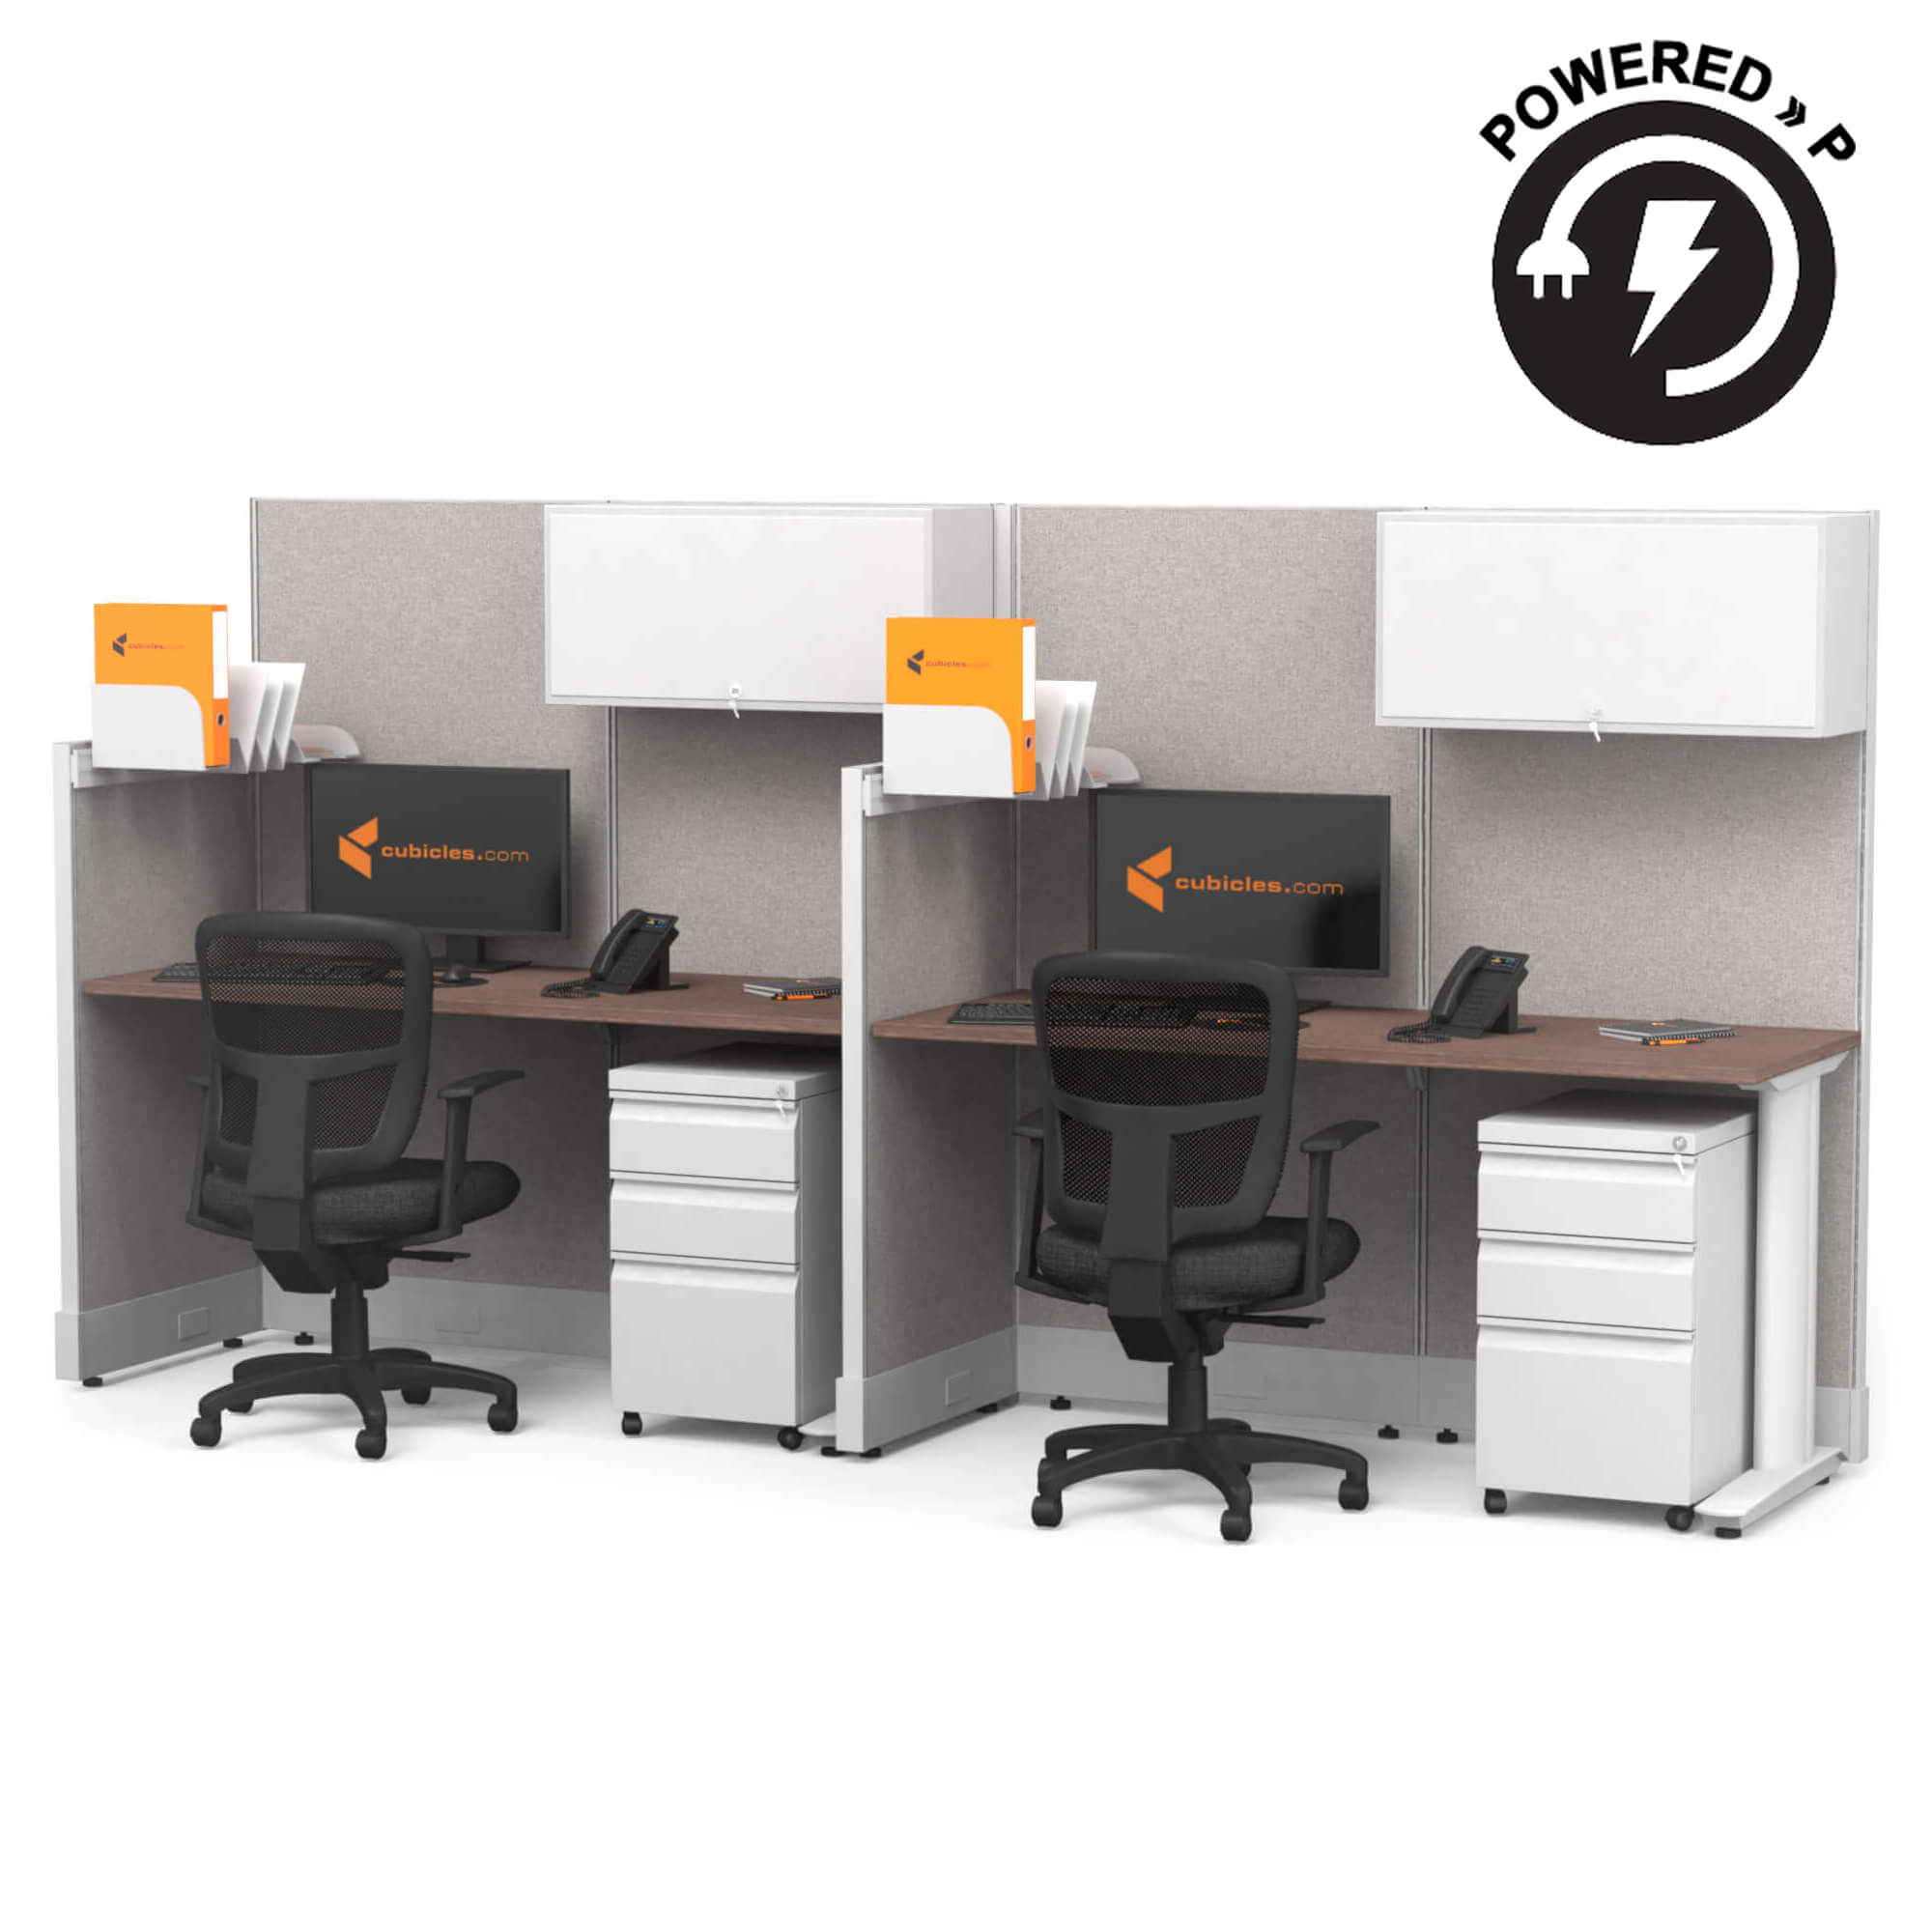 Cubicle desk straight with storage 2pack powered